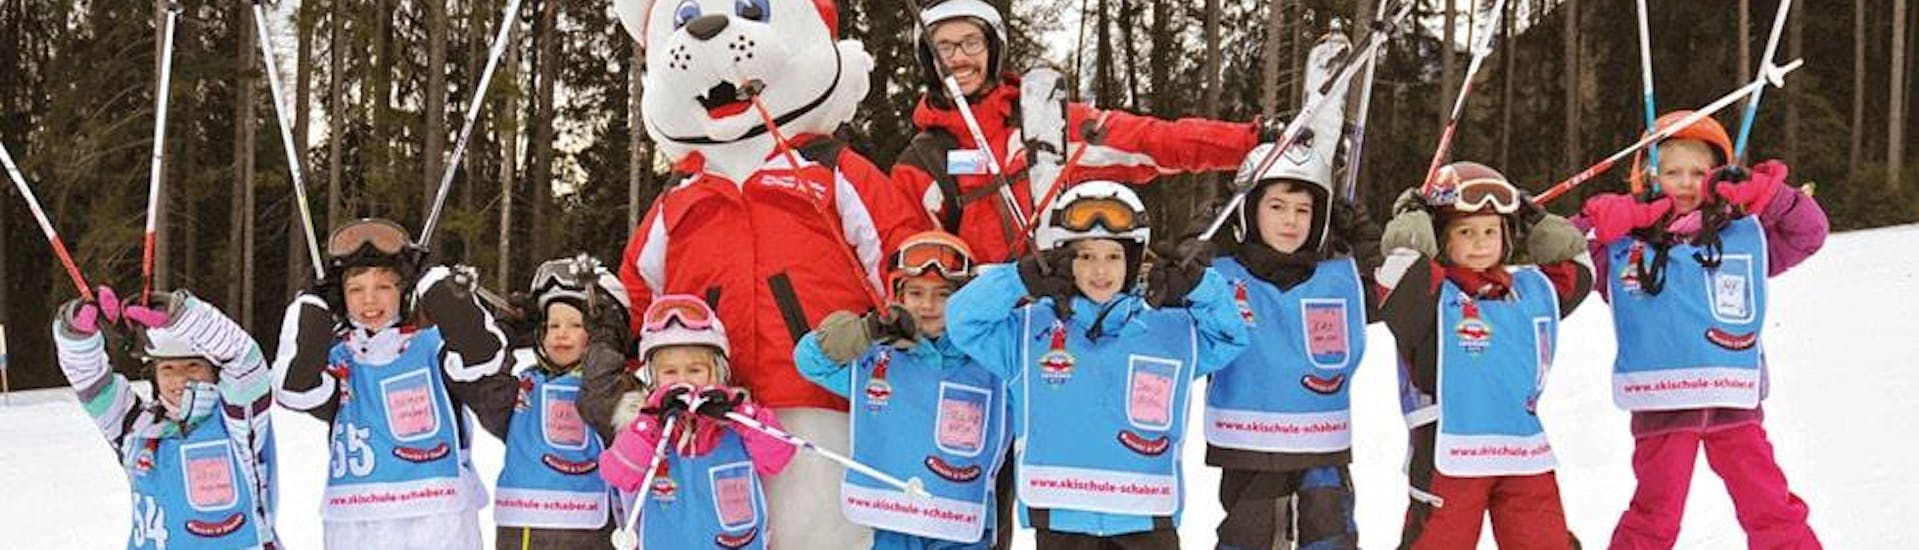 A group of children is posing for a photo with their ski instructor from Skischule Schaber in Grünberg Obsteig and the ski school mascot Hermi Hermelinchen during one of their ski lessons.